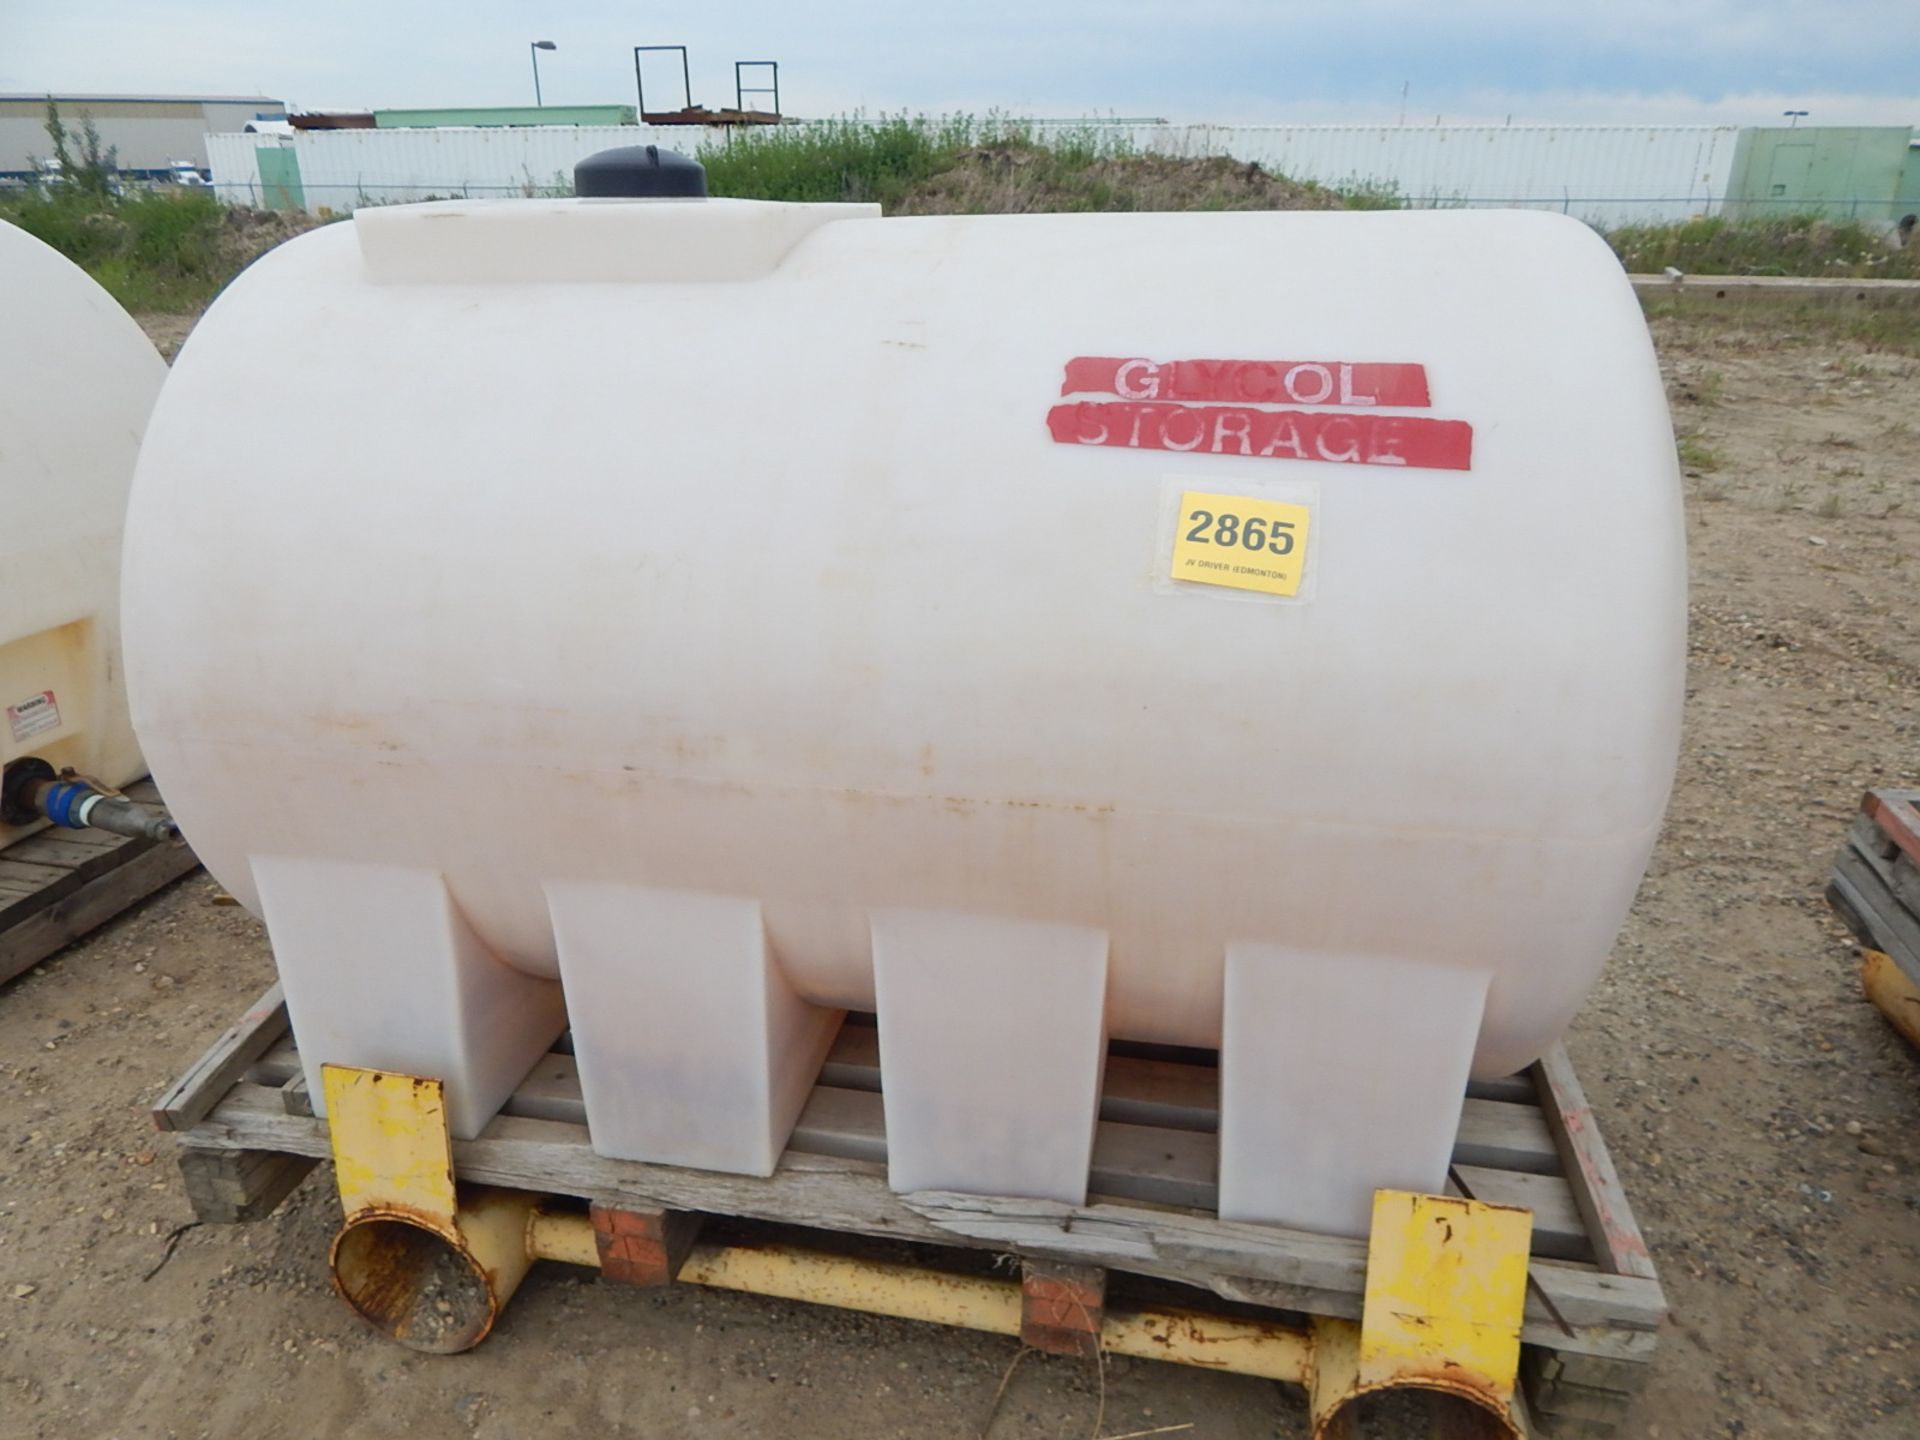 LIQUID STORAGE TANK WITH APPROX. 300GALLON CAPACITY, S/N: N/A